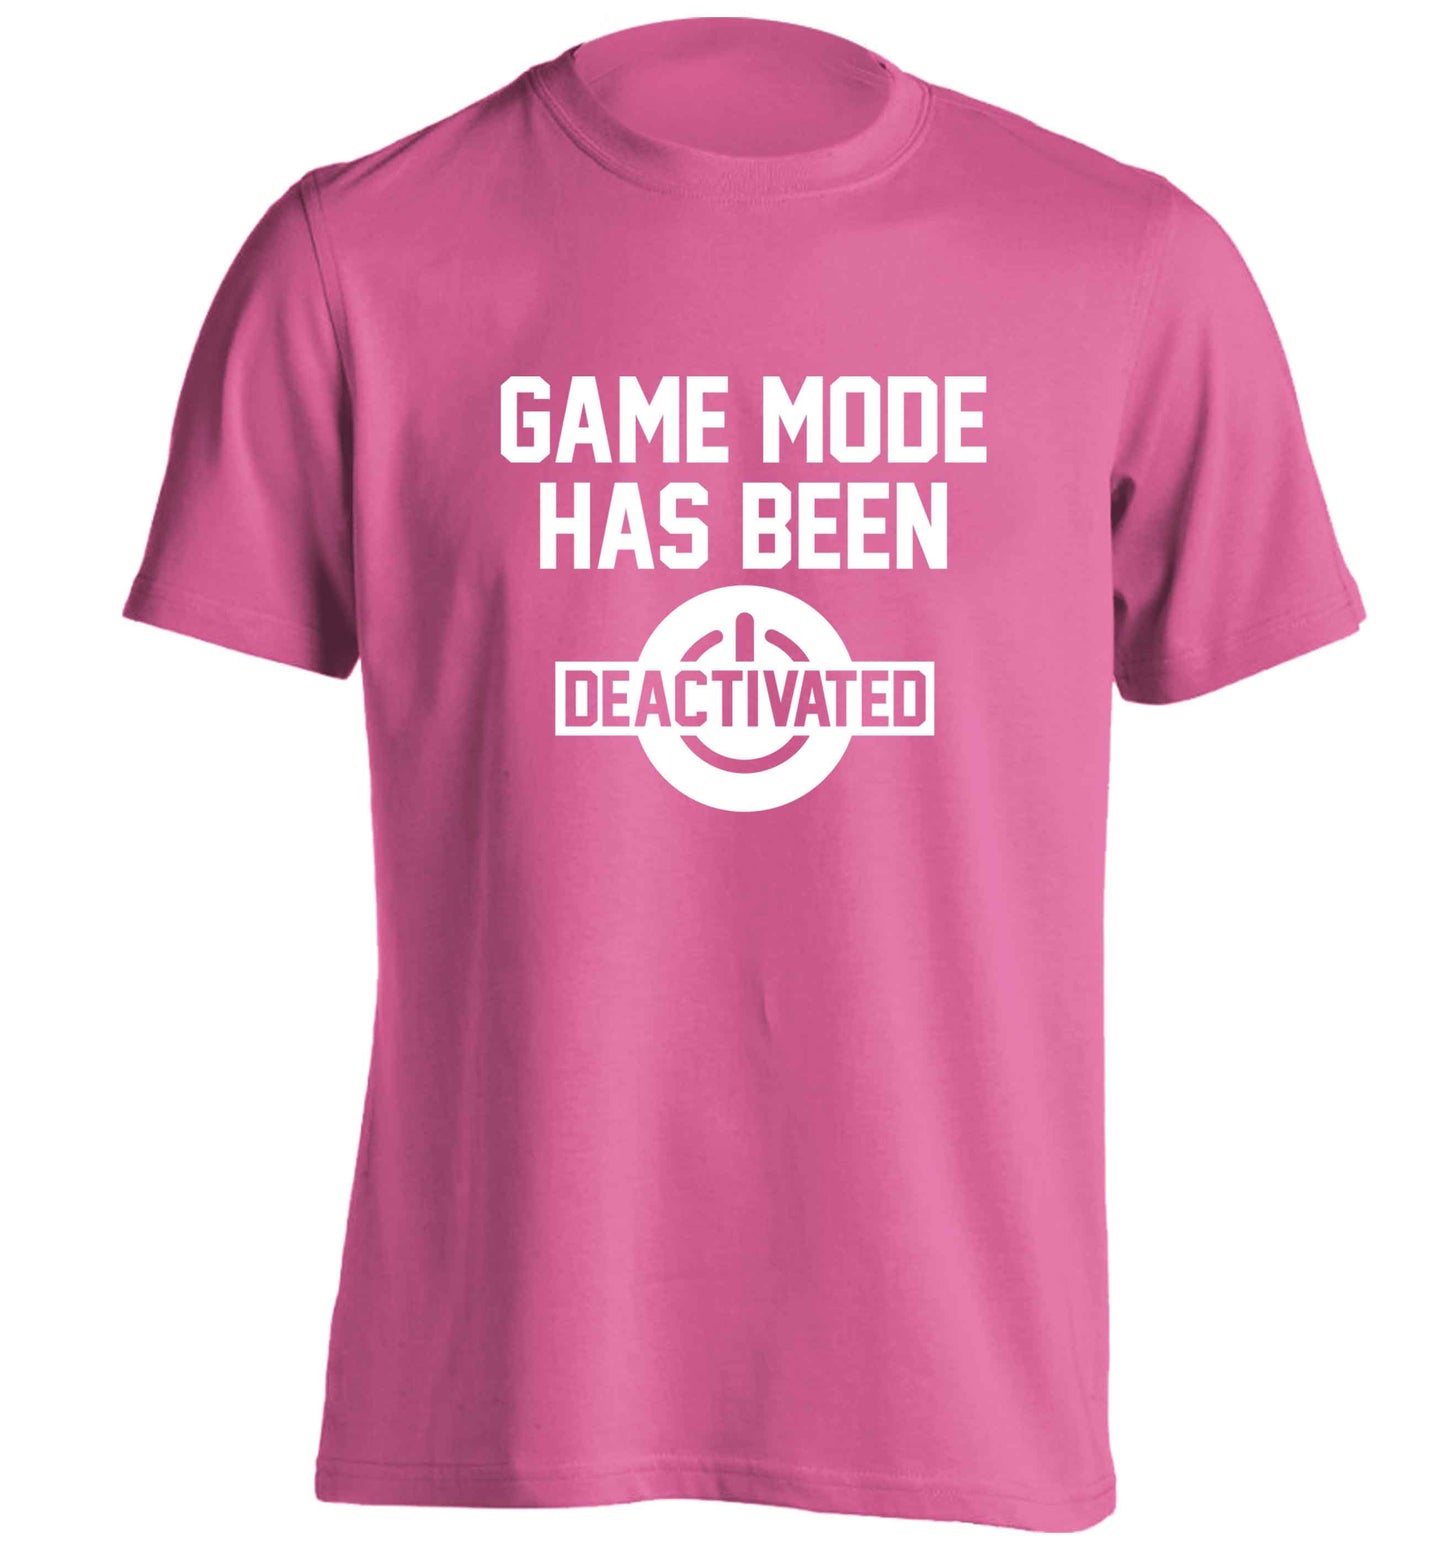 Game Mode Has Been Deactivated adults unisex pink Tshirt 2XL